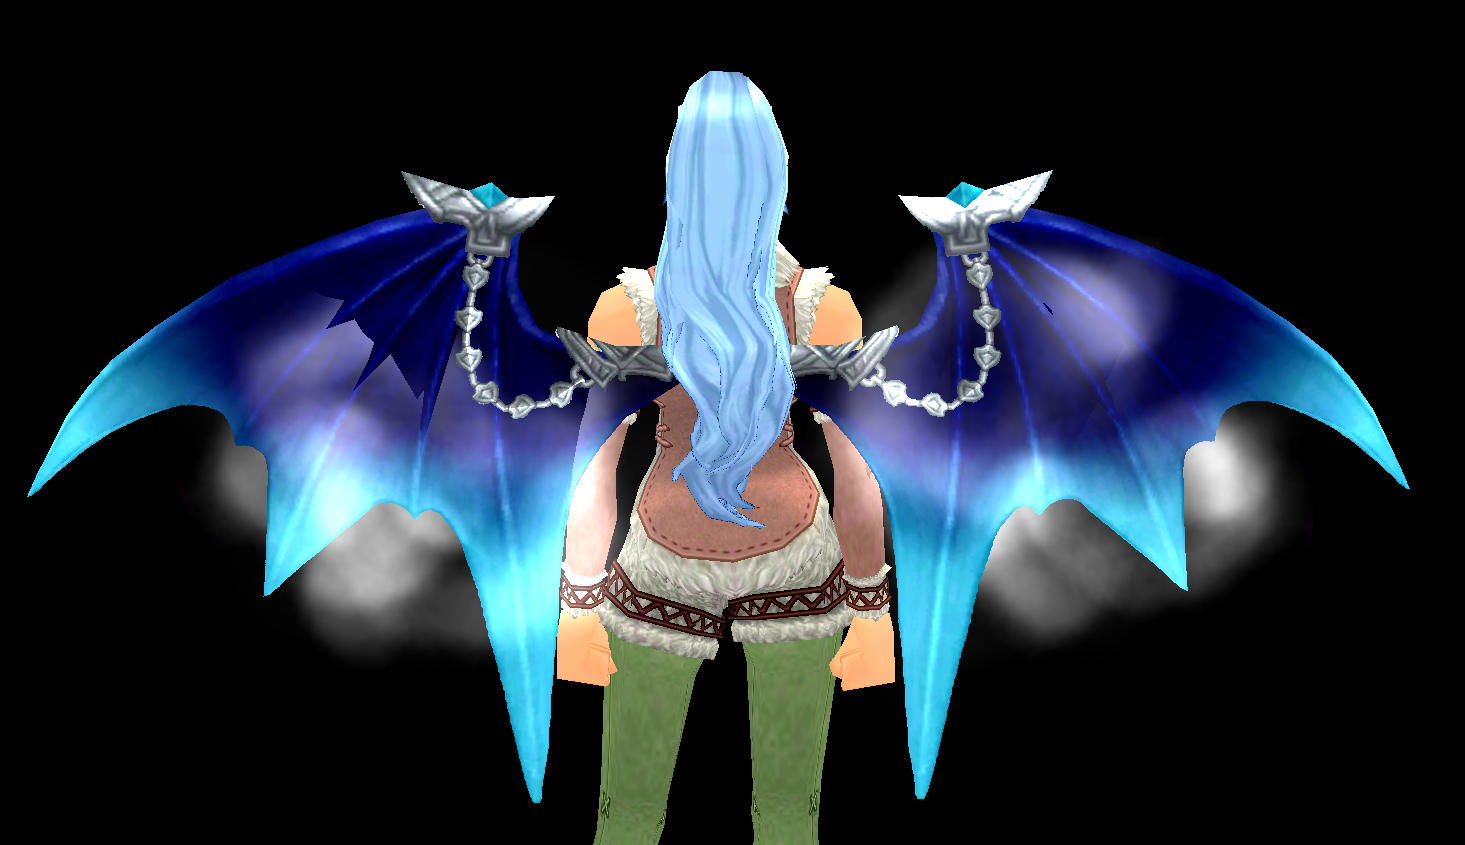 Equipped Blue Eiren Wings viewed from the back